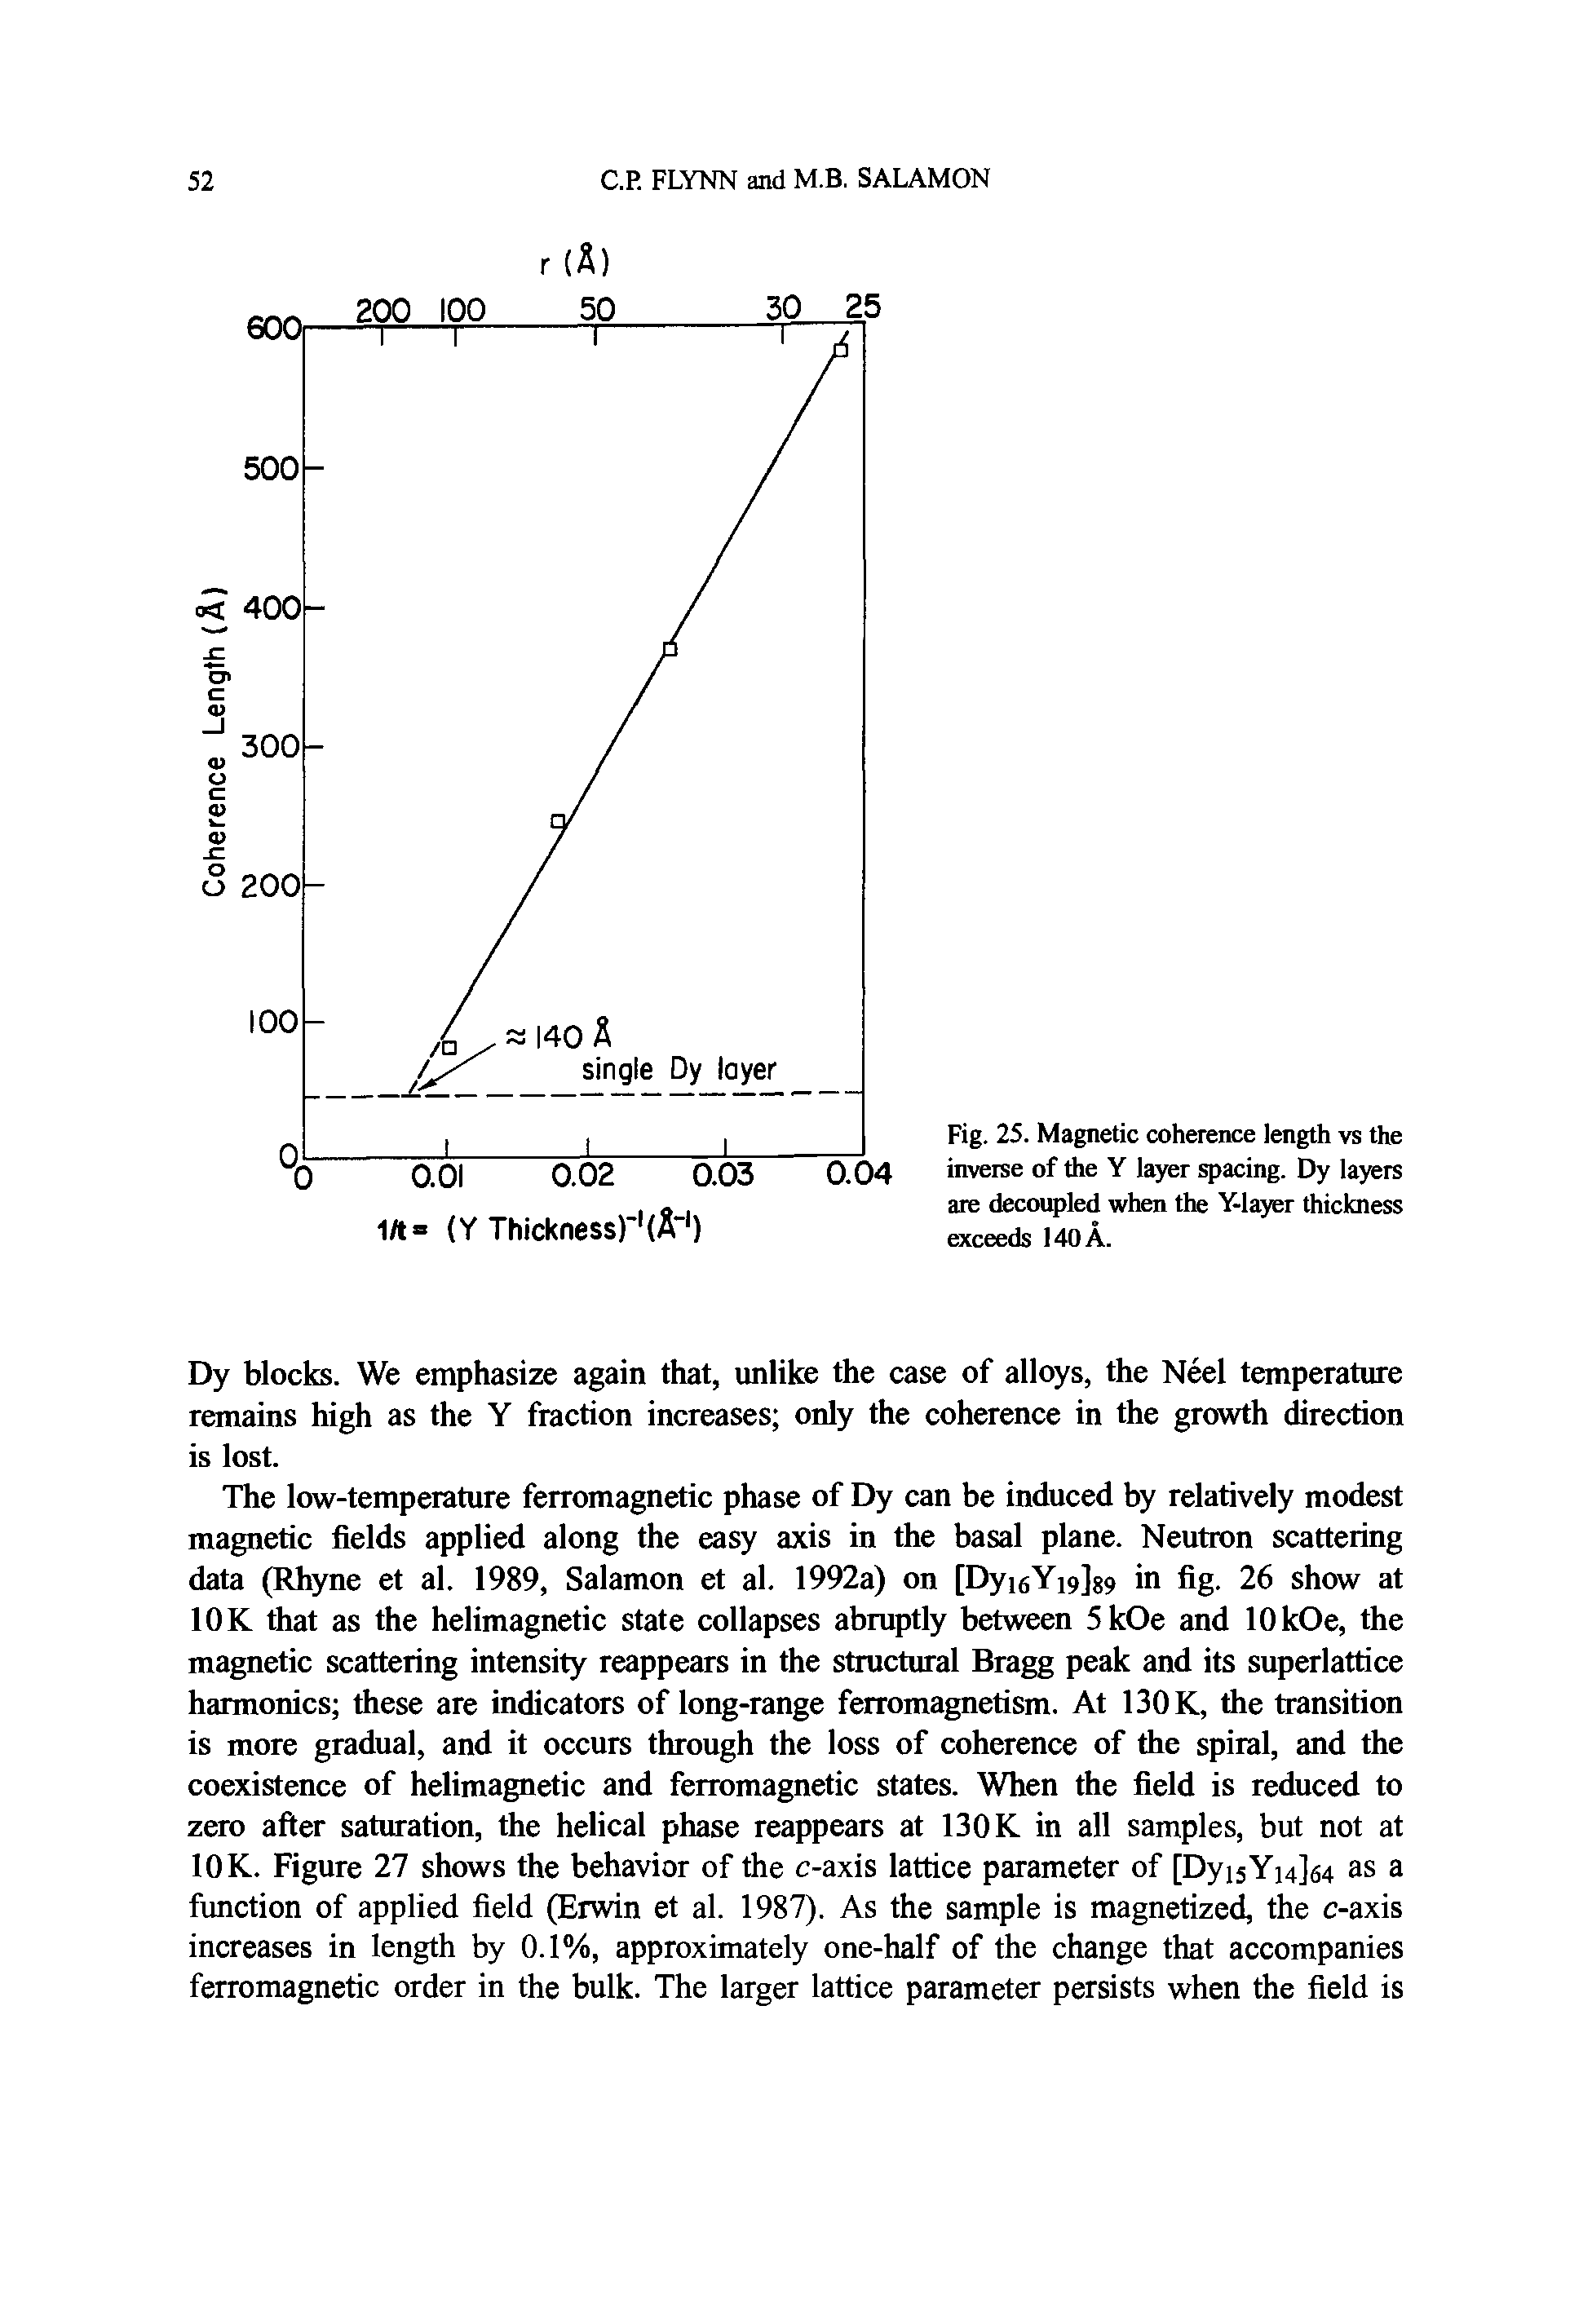 Fig. 25. Magnetic coherence length vs the inverse of the Y layer spacing. Dy layers are decoiqrled when the Ylayer thickness exceeds 140A.